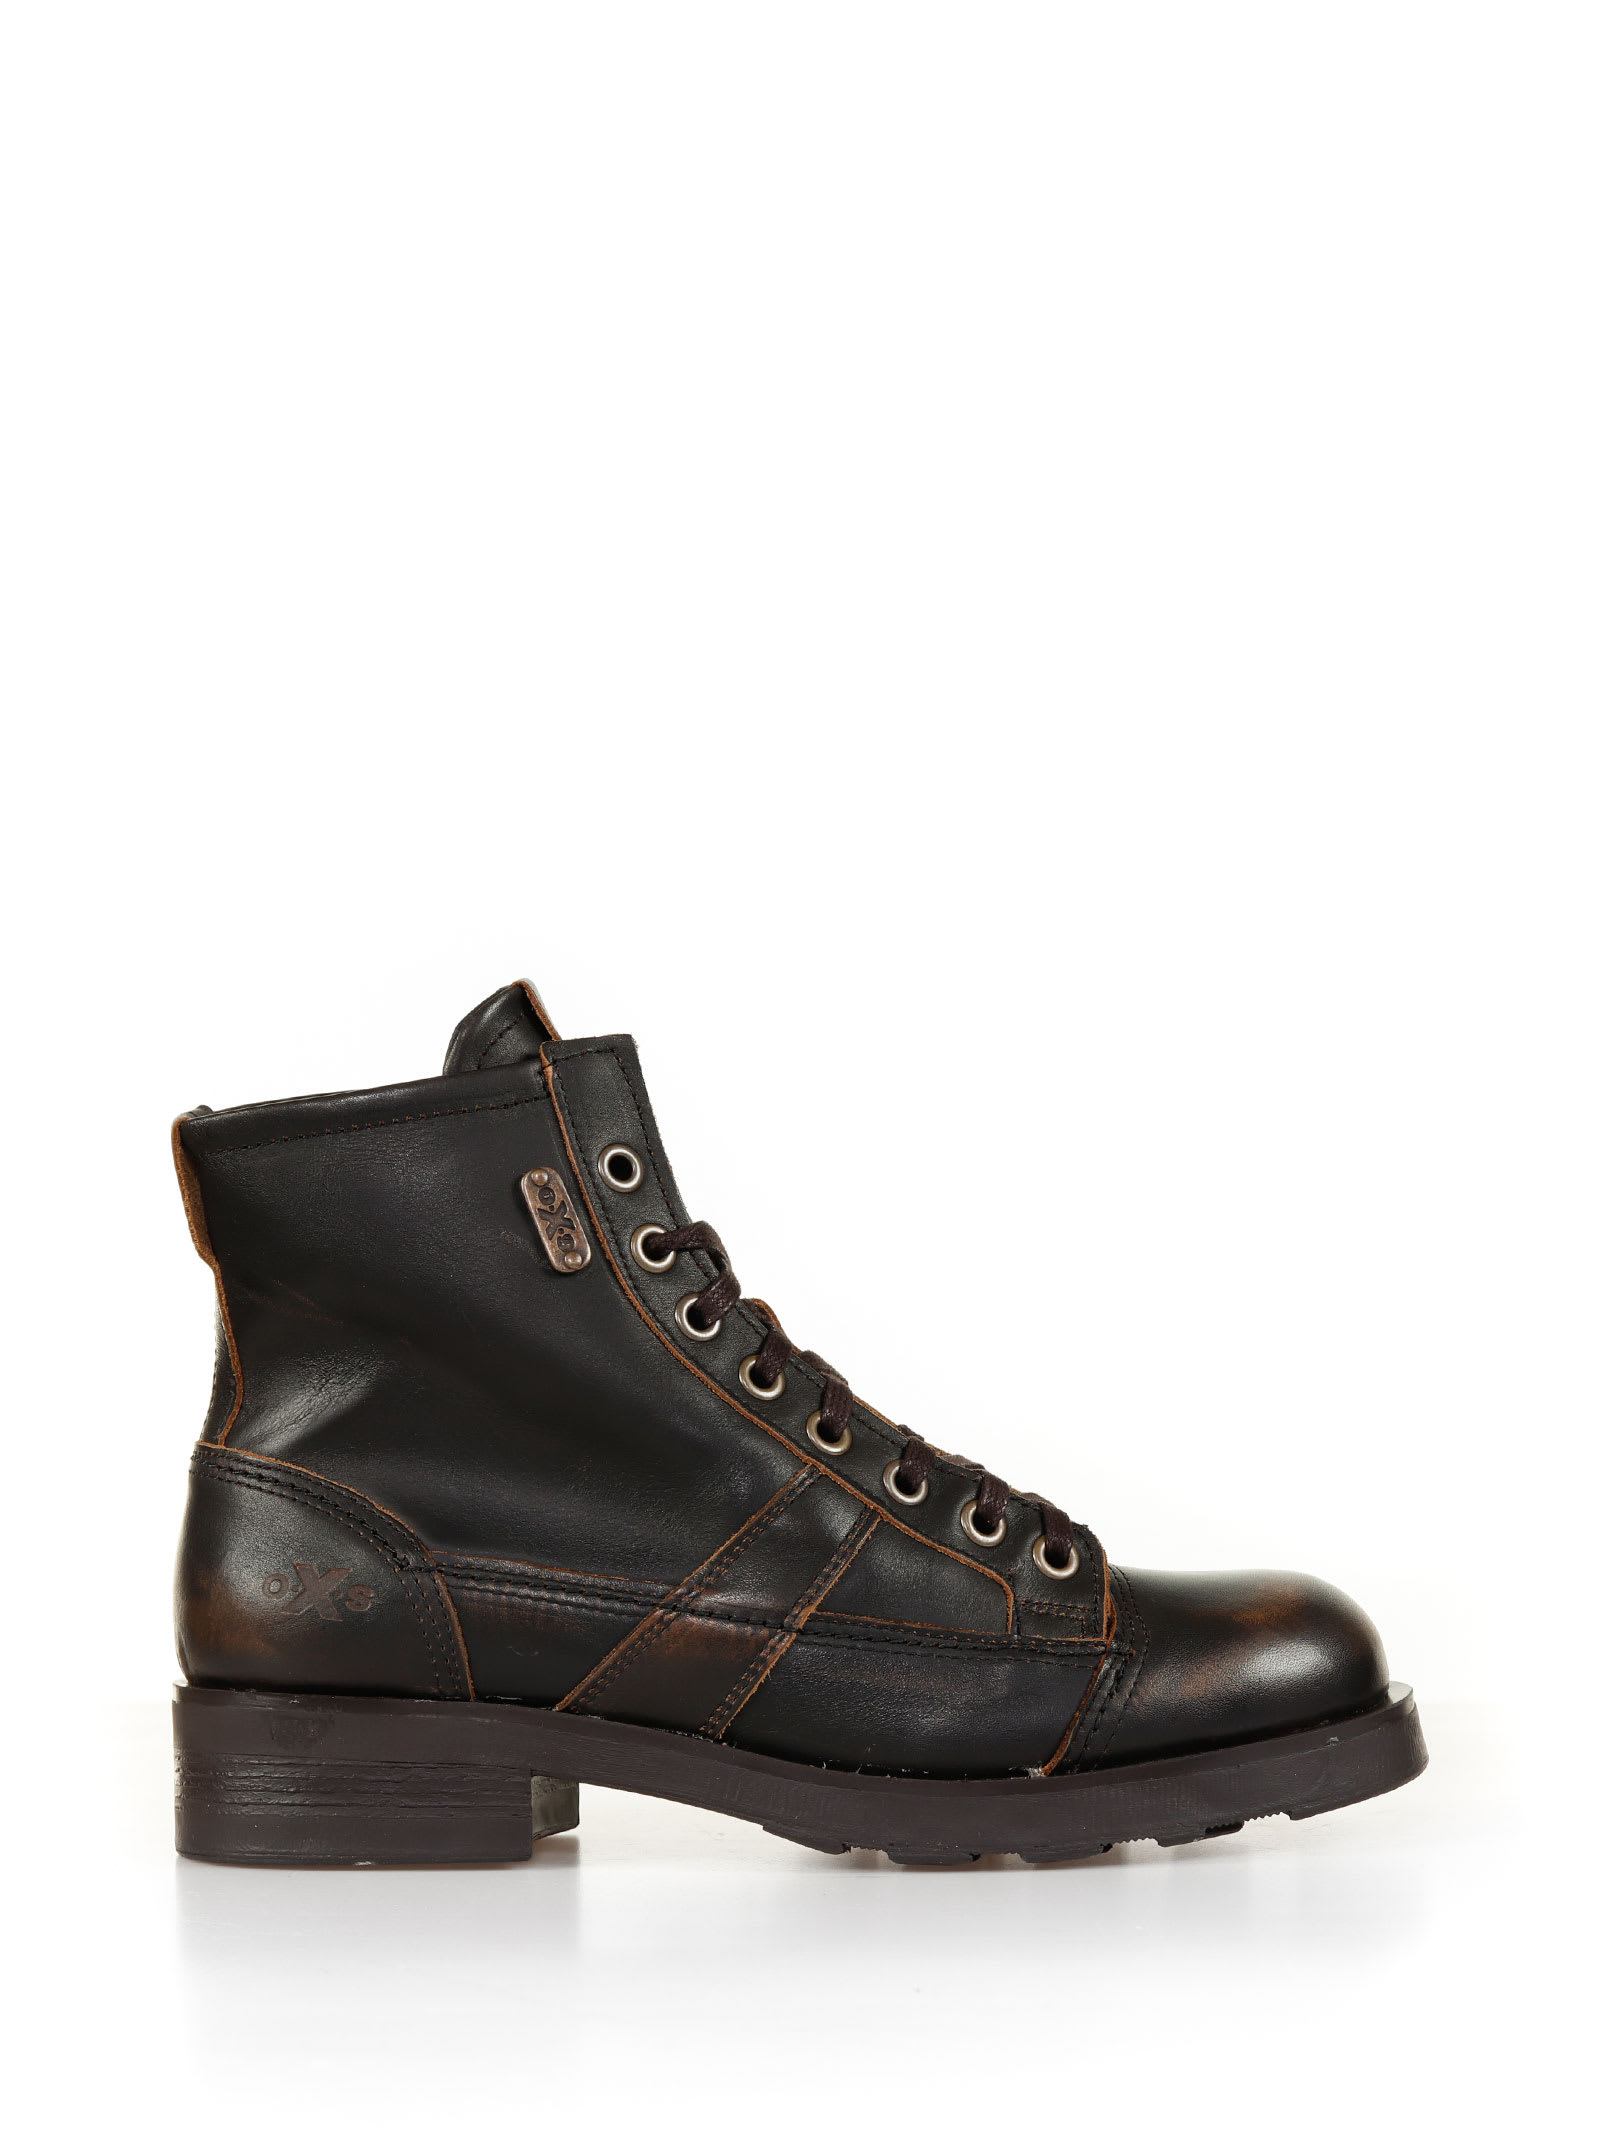 OXS Leather Boots